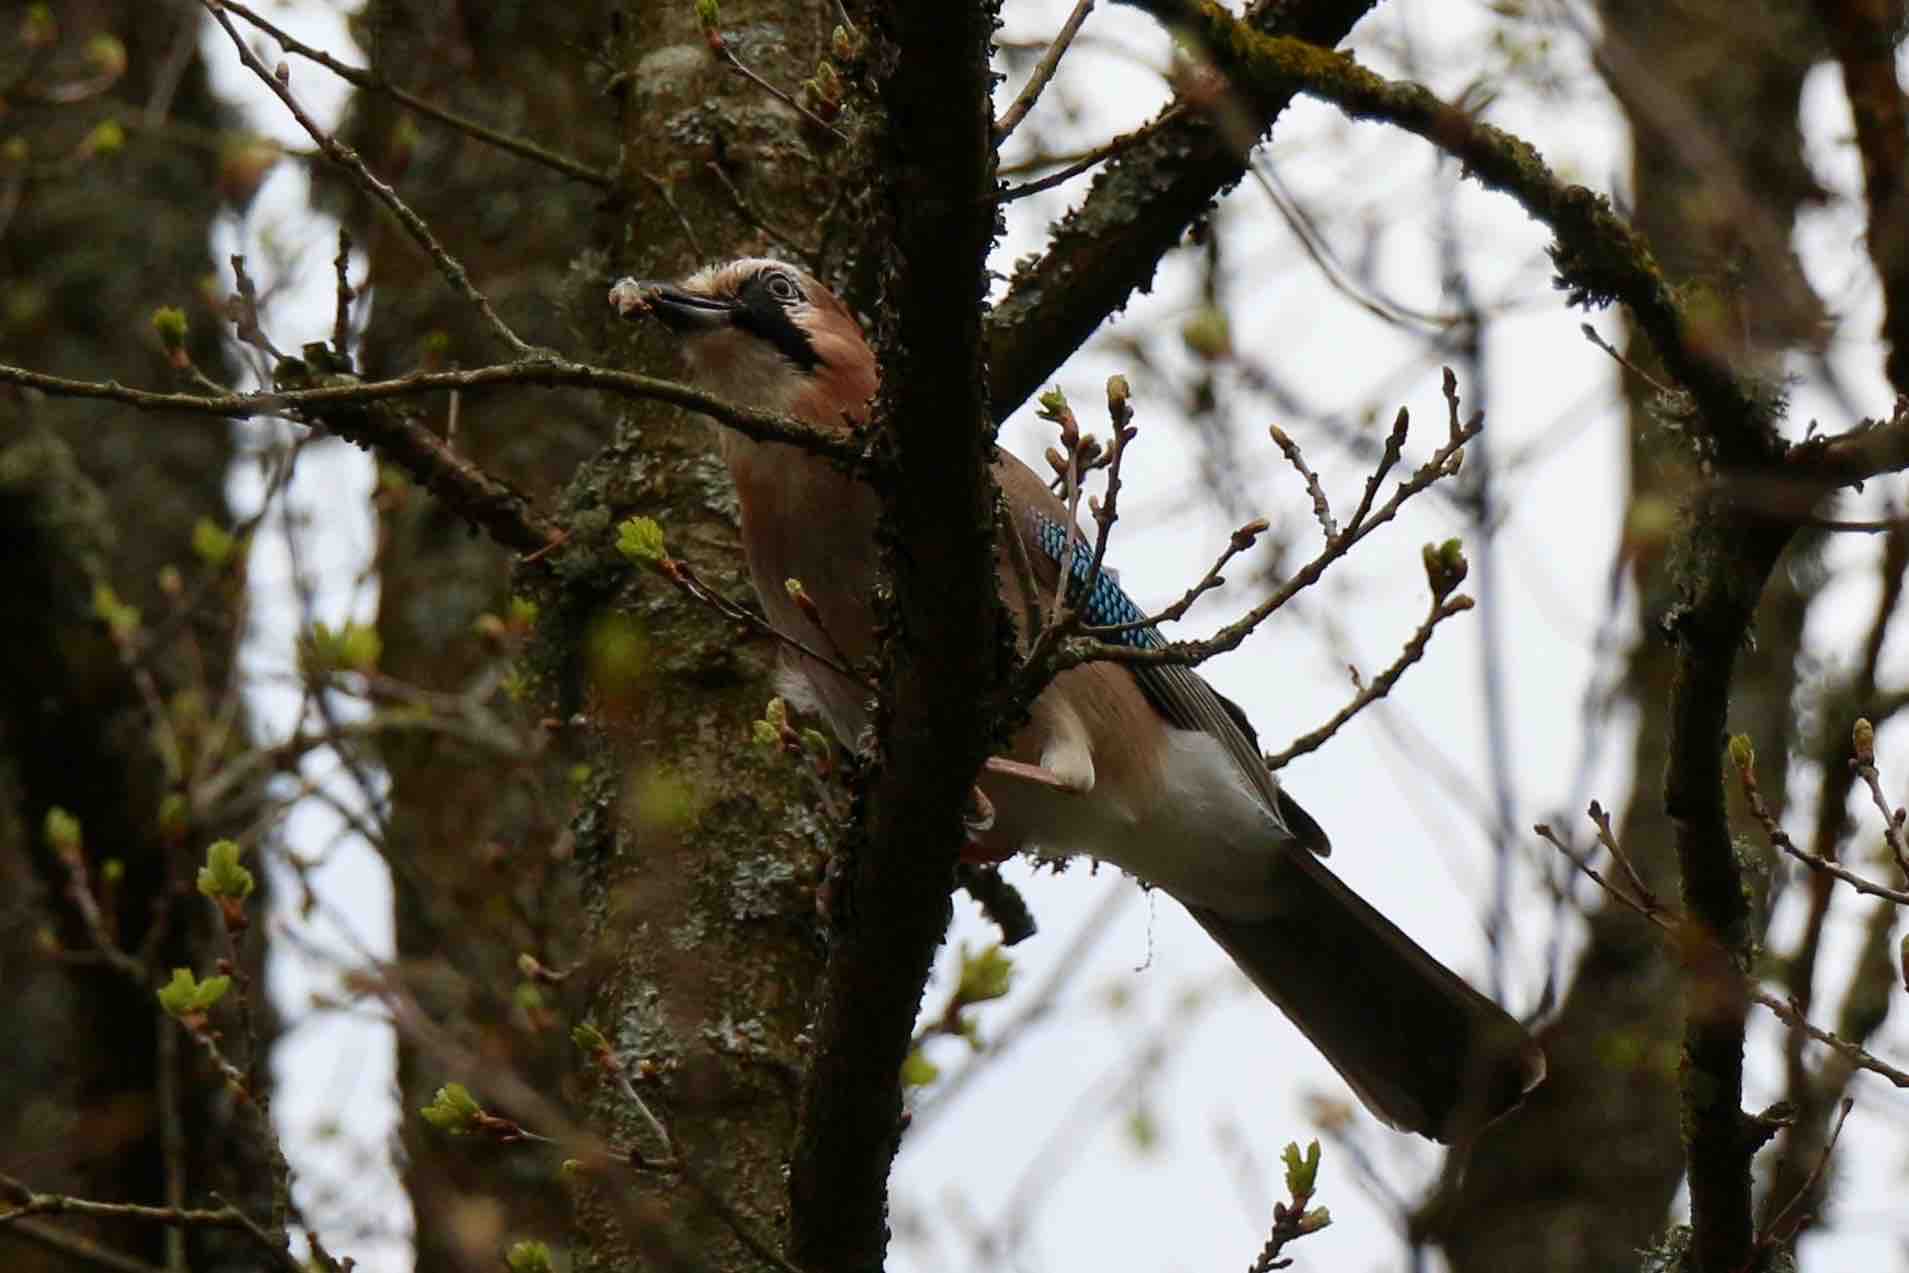 A somewhat nondescript Eurasian jay perched on a thin branch with something in its beak. Its tiny patch of blue is only partially in view at this angle.
